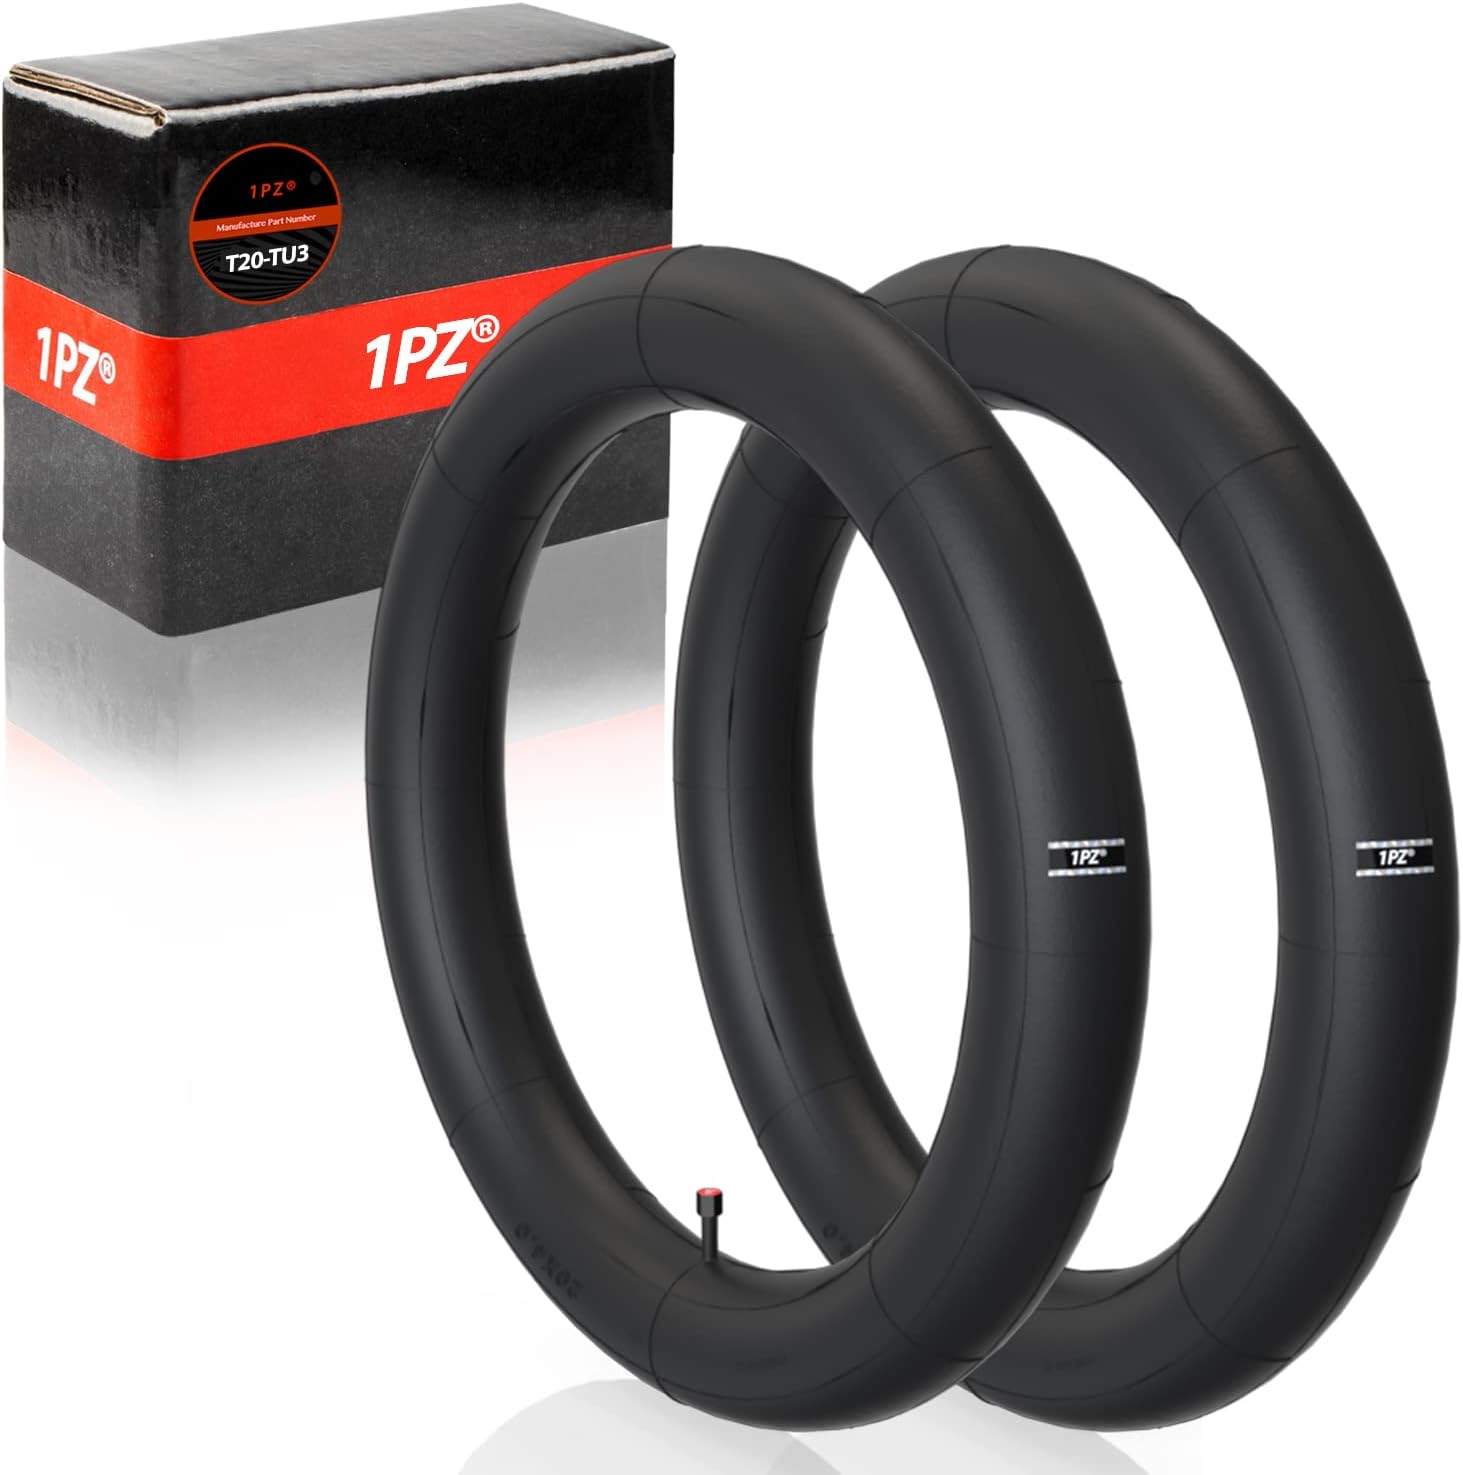 1PZ 2-Pack Fat Tire Tubes 20 x 4.0 SV32mm Schrader Valve Mountain Bike E-Bike Bicycle Tire Tubes Compatible with 20x4.0 20x4.10 20x4.20 20x4.25 20x4.30 20x4.35 20x4.40 20x4.50